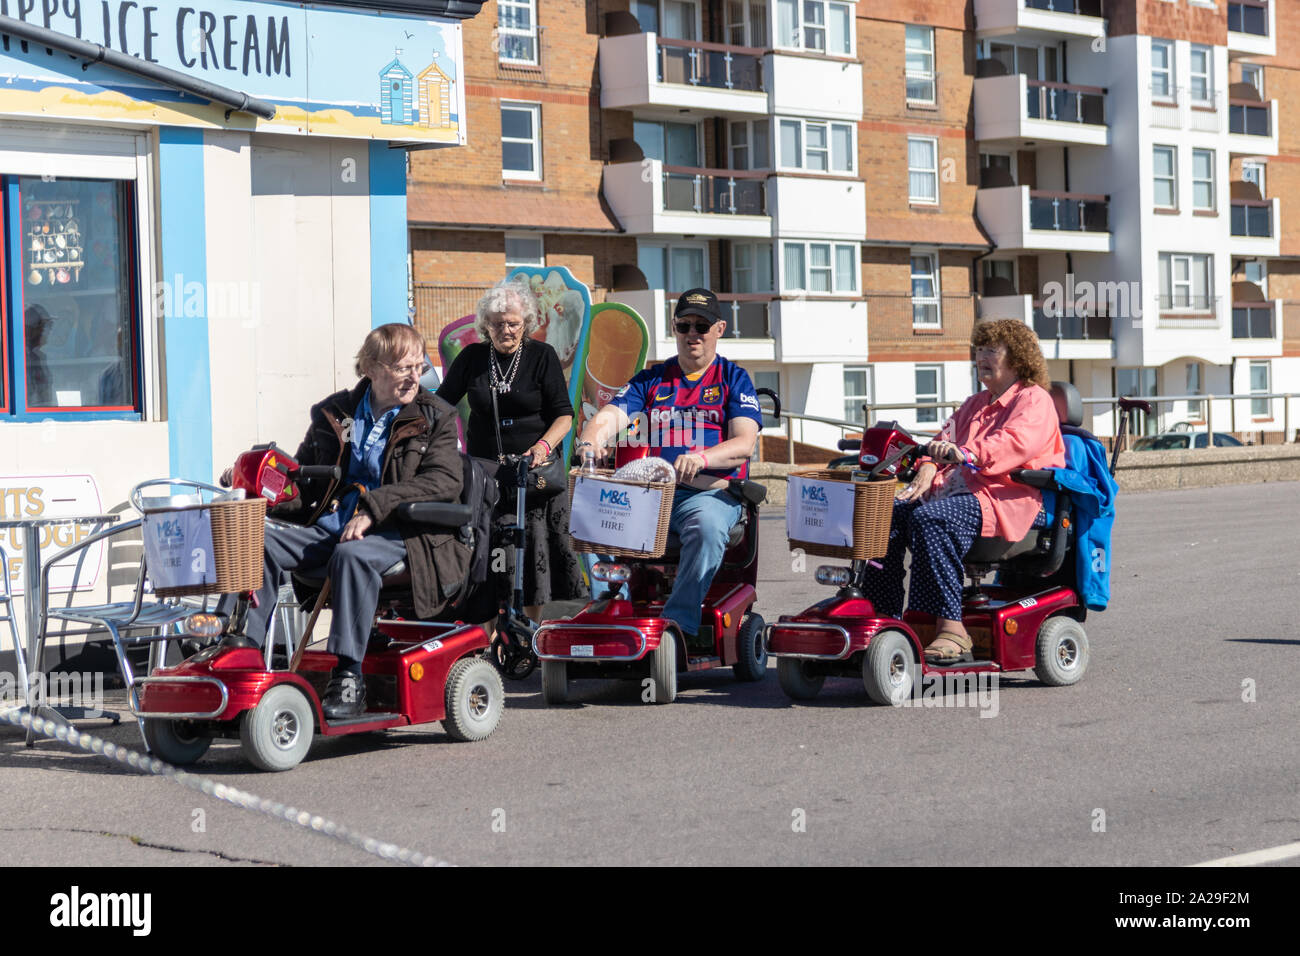 People of various ages on mobility scooters outside a seaside cafe, People with disabilities/disabled Stock Photo